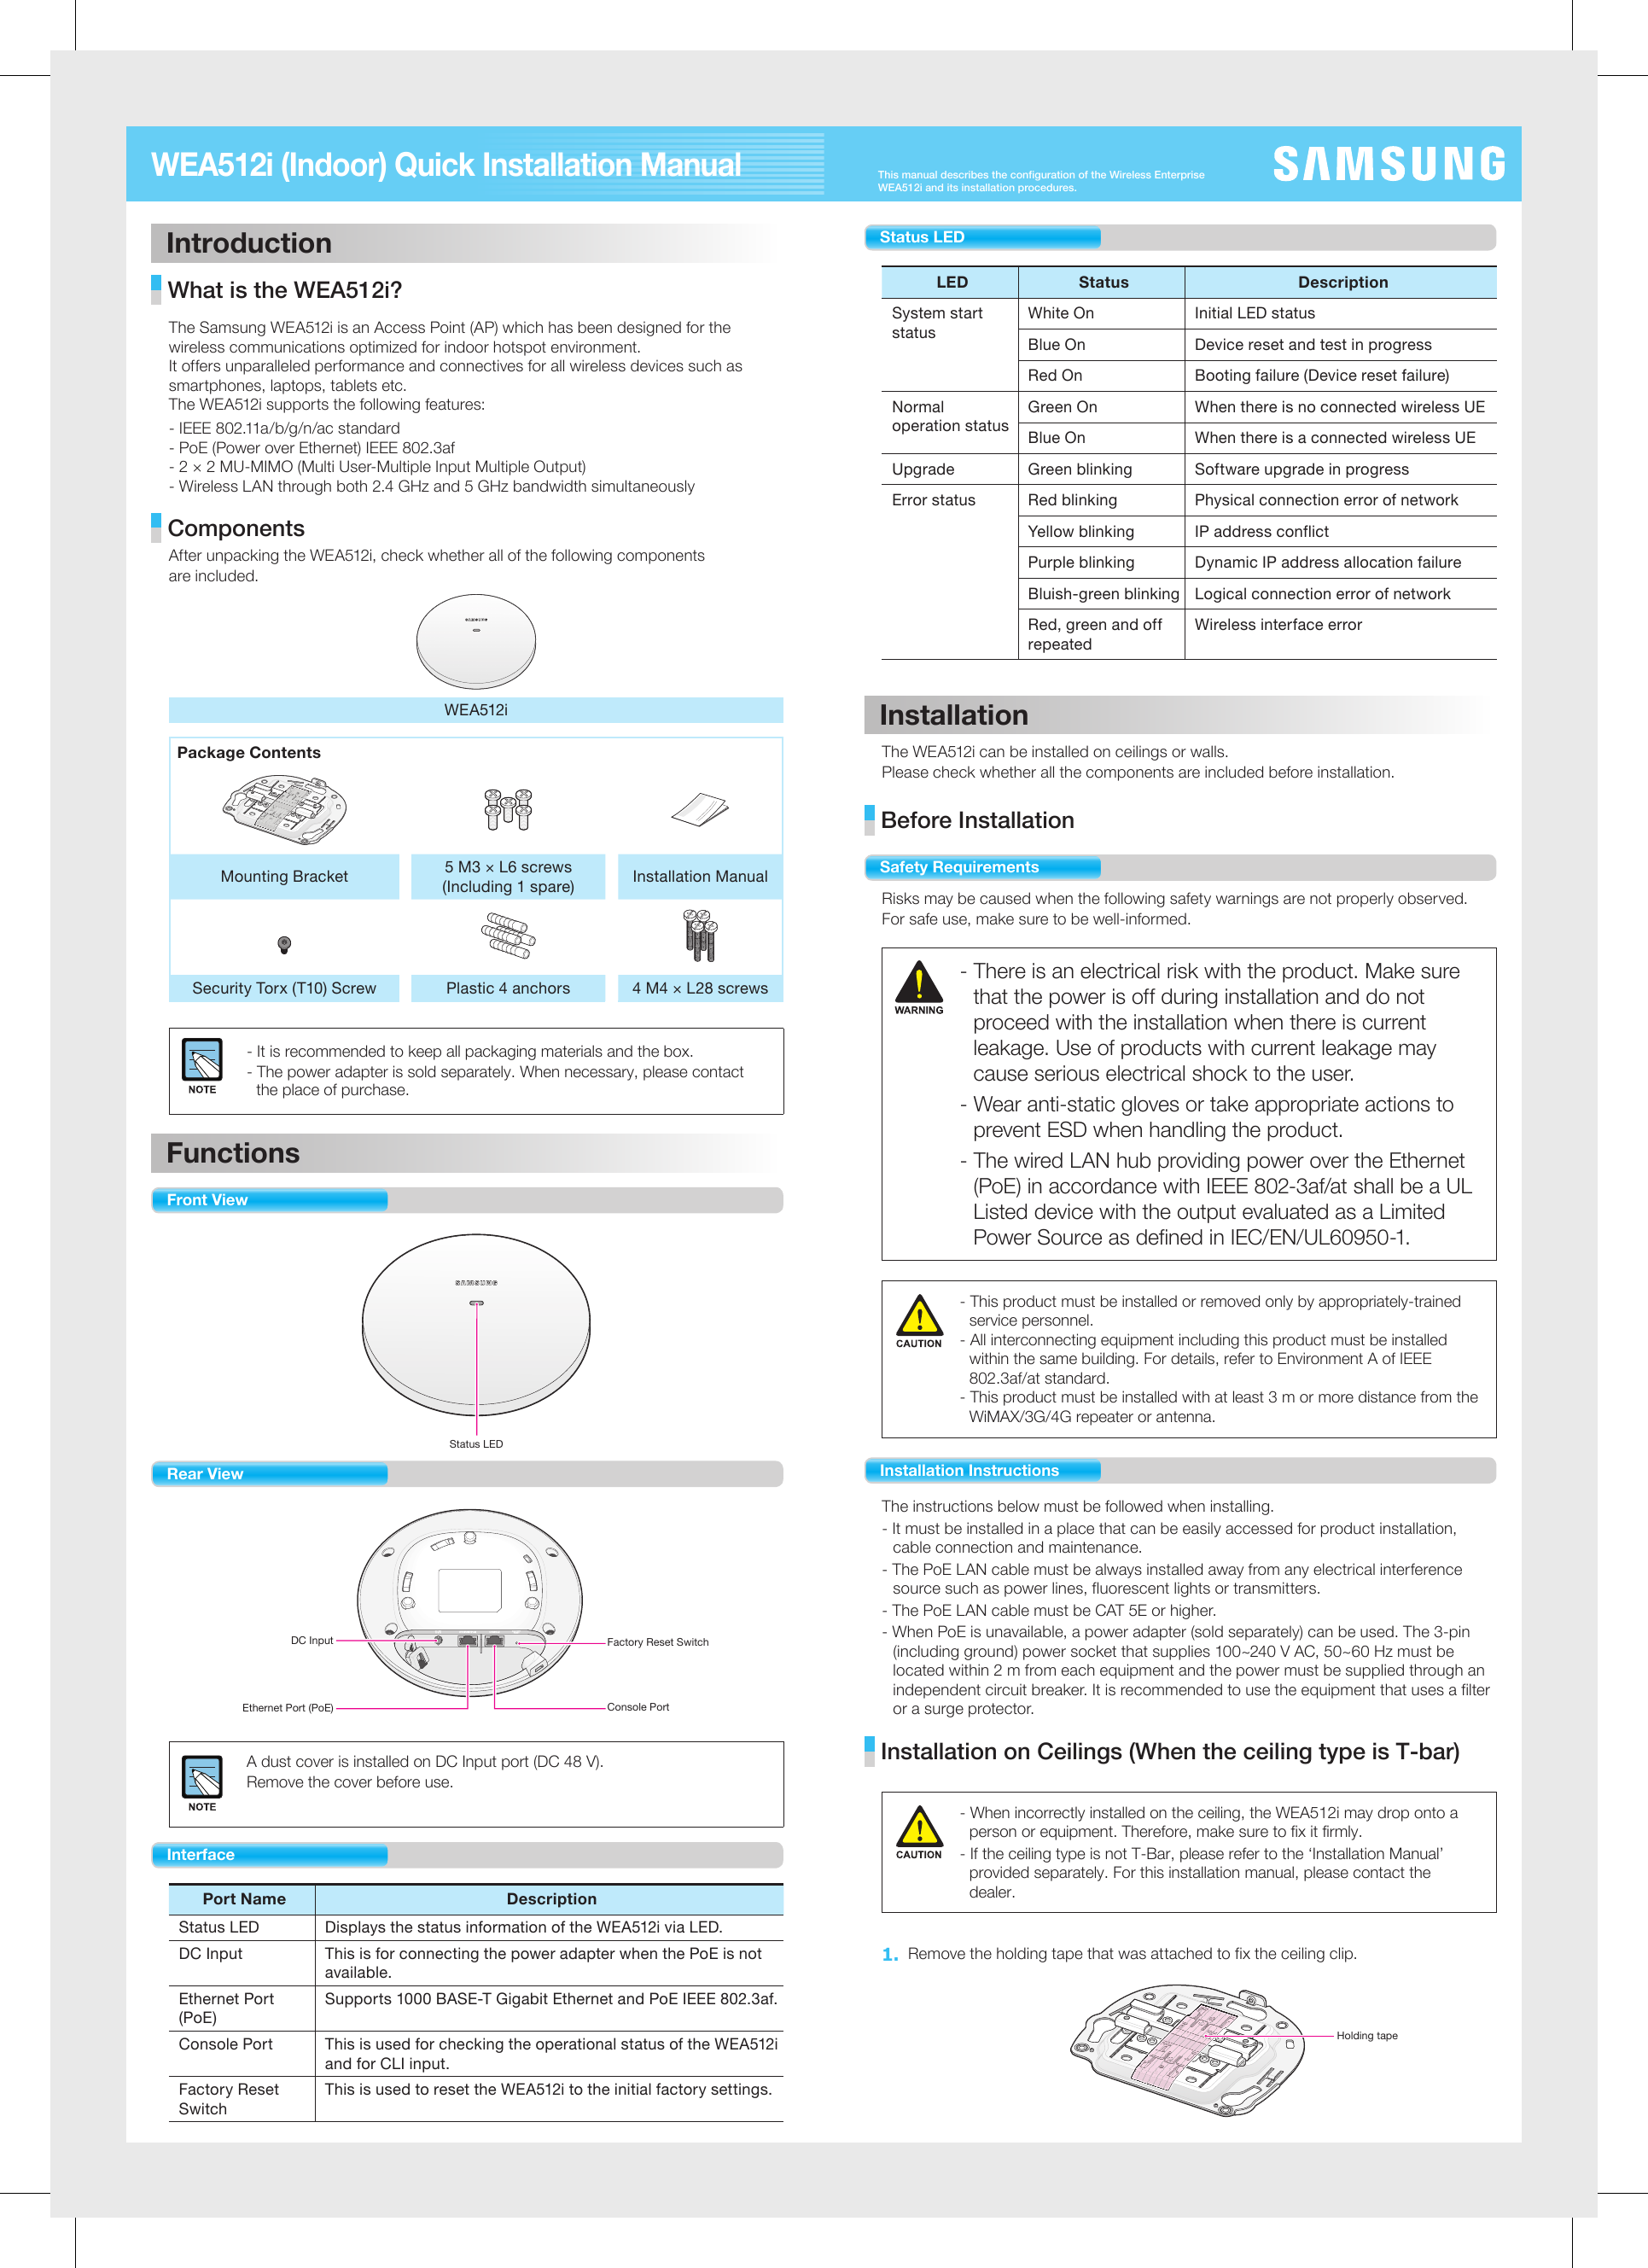 This manual describes the configuration of the Wireless Enterprise WEA512i and its installation procedures.WEA512i (Indoor) Quick Installation Manual Introduction What is the WEA512i? The Samsung WEA512i is an Access Point (AP) which has been designed for the wireless communications optimized for indoor hotspot environment. It offers unparalleled performance and connectives for all wireless devices such as smartphones, laptops, tablets etc.The WEA512i supports the following features: - IEEE 802.11a/b/g/n/ac standard- PoE (Power over Ethernet) IEEE 802.3af- 2 × 2 MU-MIMO (Multi User-Multiple Input Multiple Output)- Wireless LAN through both 2.4 GHz and 5 GHz bandwidth simultaneously Components After unpacking the WEA512i, check whether all of the following componentsare included.WEA512iPackage ContentsMounting Bracket 5 M3 × L6 screws(Including 1 spare) Installation ManualSecurity Torx (T10) Screw Plastic 4 anchors  4 M4 × L28 screws - It is recommended to keep all packaging materials and the box.- The power adapter is sold separately. When necessary, please contact the place of purchase.Functions Front View Status LED  Rear View DC InputEthernet Port (PoE)Factory Reset SwitchConsole PortA dust cover is installed on DC Input port (DC 48 V). Remove the cover before use. InterfacePort NameDescriptionStatus LED  Displays the status information of the WEA512i via LED.DC Input This is for connecting the power adapter when the PoE is not available.Ethernet Port (PoE)Supports 1000 BASE-T Gigabit Ethernet and PoE IEEE 802.3af.Console Port  This is used for checking the operational status of the WEA512i and for CLI input.Factory Reset SwitchThis is used to reset the WEA512i to the initial factory settings.Status LEDLED Status  Description System start statusWhite On  Initial LED status Blue On  Device reset and test in progressRed On  Booting failure (Device reset failure) Normal operation statusGreen On  When there is no connected wireless UE Blue On  When there is a connected wireless UEUpgrade  Green blinking  Software upgrade in progressError status  Red blinking  Physical connection error of network Yellow blinking  IP address conflict Purple blinking  Dynamic IP address allocation failure Bluish-green blinking  Logical connection error of network Red, green and off repeatedWireless interface error InstallationThe WEA512i can be installed on ceilings or walls.Please check whether all the components are included before installation. Before Installation Safety RequirementsRisks may be caused when the following safety warnings are not properly observed. For safe use, make sure to be well-informed. - There is an electrical risk with the product. Make sure that the power is off during installation and do not proceed with the installation when there is current leakage. Use of products with current leakage may cause serious electrical shock to the user.- Wear anti-static gloves or take appropriate actions to prevent ESD when handling the product.- The wired LAN hub providing power over the Ethernet (PoE) in accordance with IEEE 802-3af/at shall be a UL Listed device with the output evaluated as a Limited Power Source as defined in IEC/EN/UL60950-1.- This product must be installed or removed only by appropriately-trained service personnel.- All interconnecting equipment including this product must be installed within the same building. For details, refer to Environment A of IEEE 802.3af/at standard.- This product must be installed with at least 3 m or more distance from the WiMAX/3G/4G repeater or antenna.Installation InstructionsThe instructions below must be followed when installing. - It must be installed in a place that can be easily accessed for product installation, cable connection and maintenance.- The PoE LAN cable must be always installed away from any electrical interference source such as power lines, fluorescent lights or transmitters.- The PoE LAN cable must be CAT 5E or higher.- When PoE is unavailable, a power adapter (sold separately) can be used. The 3-pin (including ground) power socket that supplies 100~240 V AC, 50~60 Hz must be located within 2 m from each equipment and the power must be supplied through an independent circuit breaker. It is recommended to use the equipment that uses a filter or a surge protector.   Installation on Ceilings (When the ceiling type is T-bar)- When incorrectly installed on the ceiling, the WEA512i may drop onto a person or equipment. Therefore, make sure to fix it firmly.- If the ceiling type is not T-Bar, please refer to the ‘Installation Manual’ provided separately. For this installation manual, please contact the dealer. 1. Remove the holding tape that was attached to fix the ceiling clip.                         Holding tape 